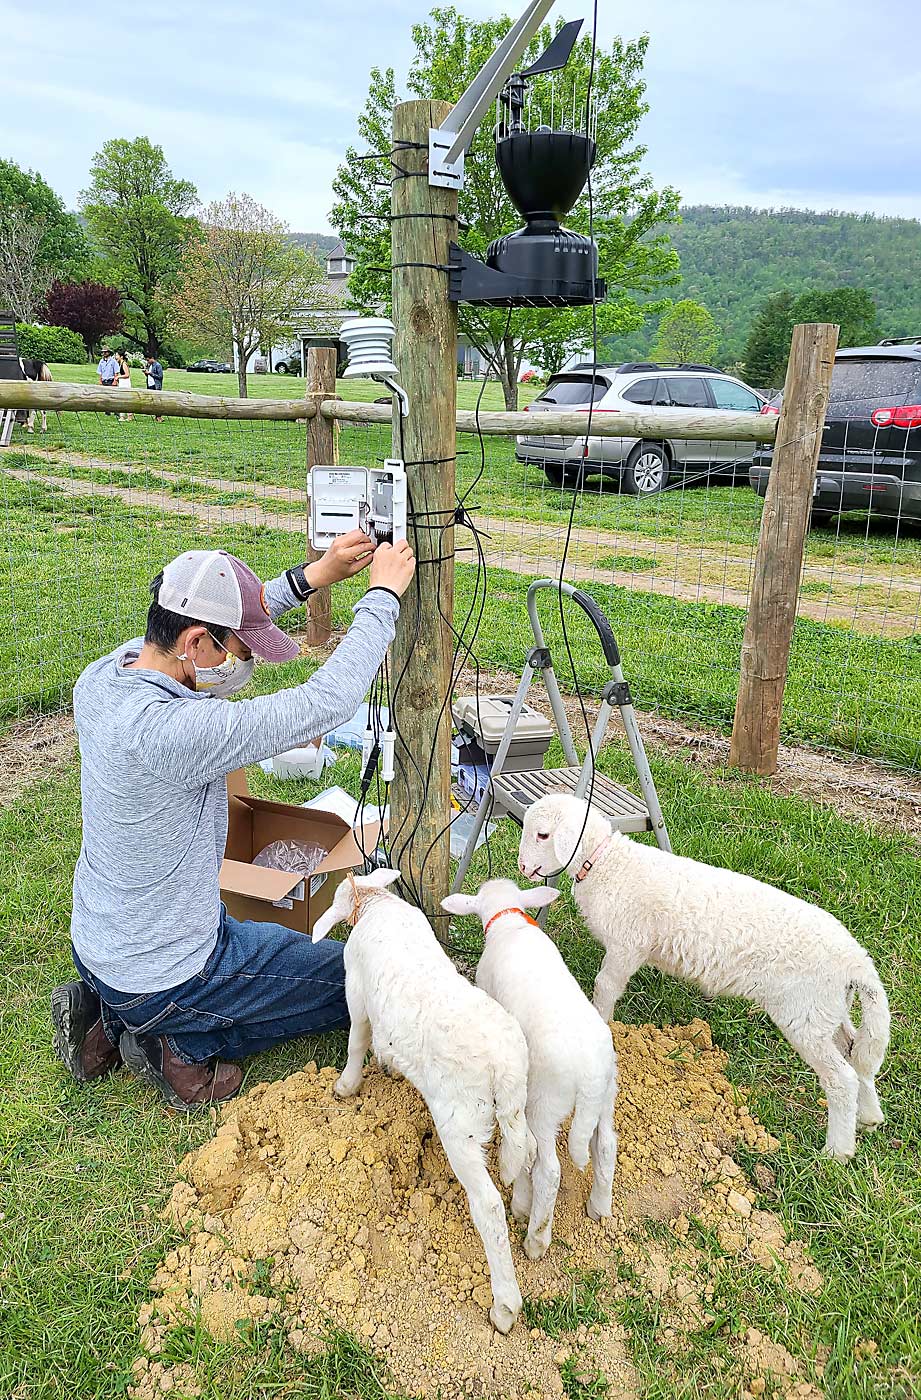 Nita installs a different weather station at Veritas, with help from the vineyard’s sheep. The stations are part of Virginia Tech’s Sentinel Vineyard Project, which helps growers share information and track weather and disease patterns across the state. (Courtesy Bill Tonkins/Veritas Vineyards and Winery)